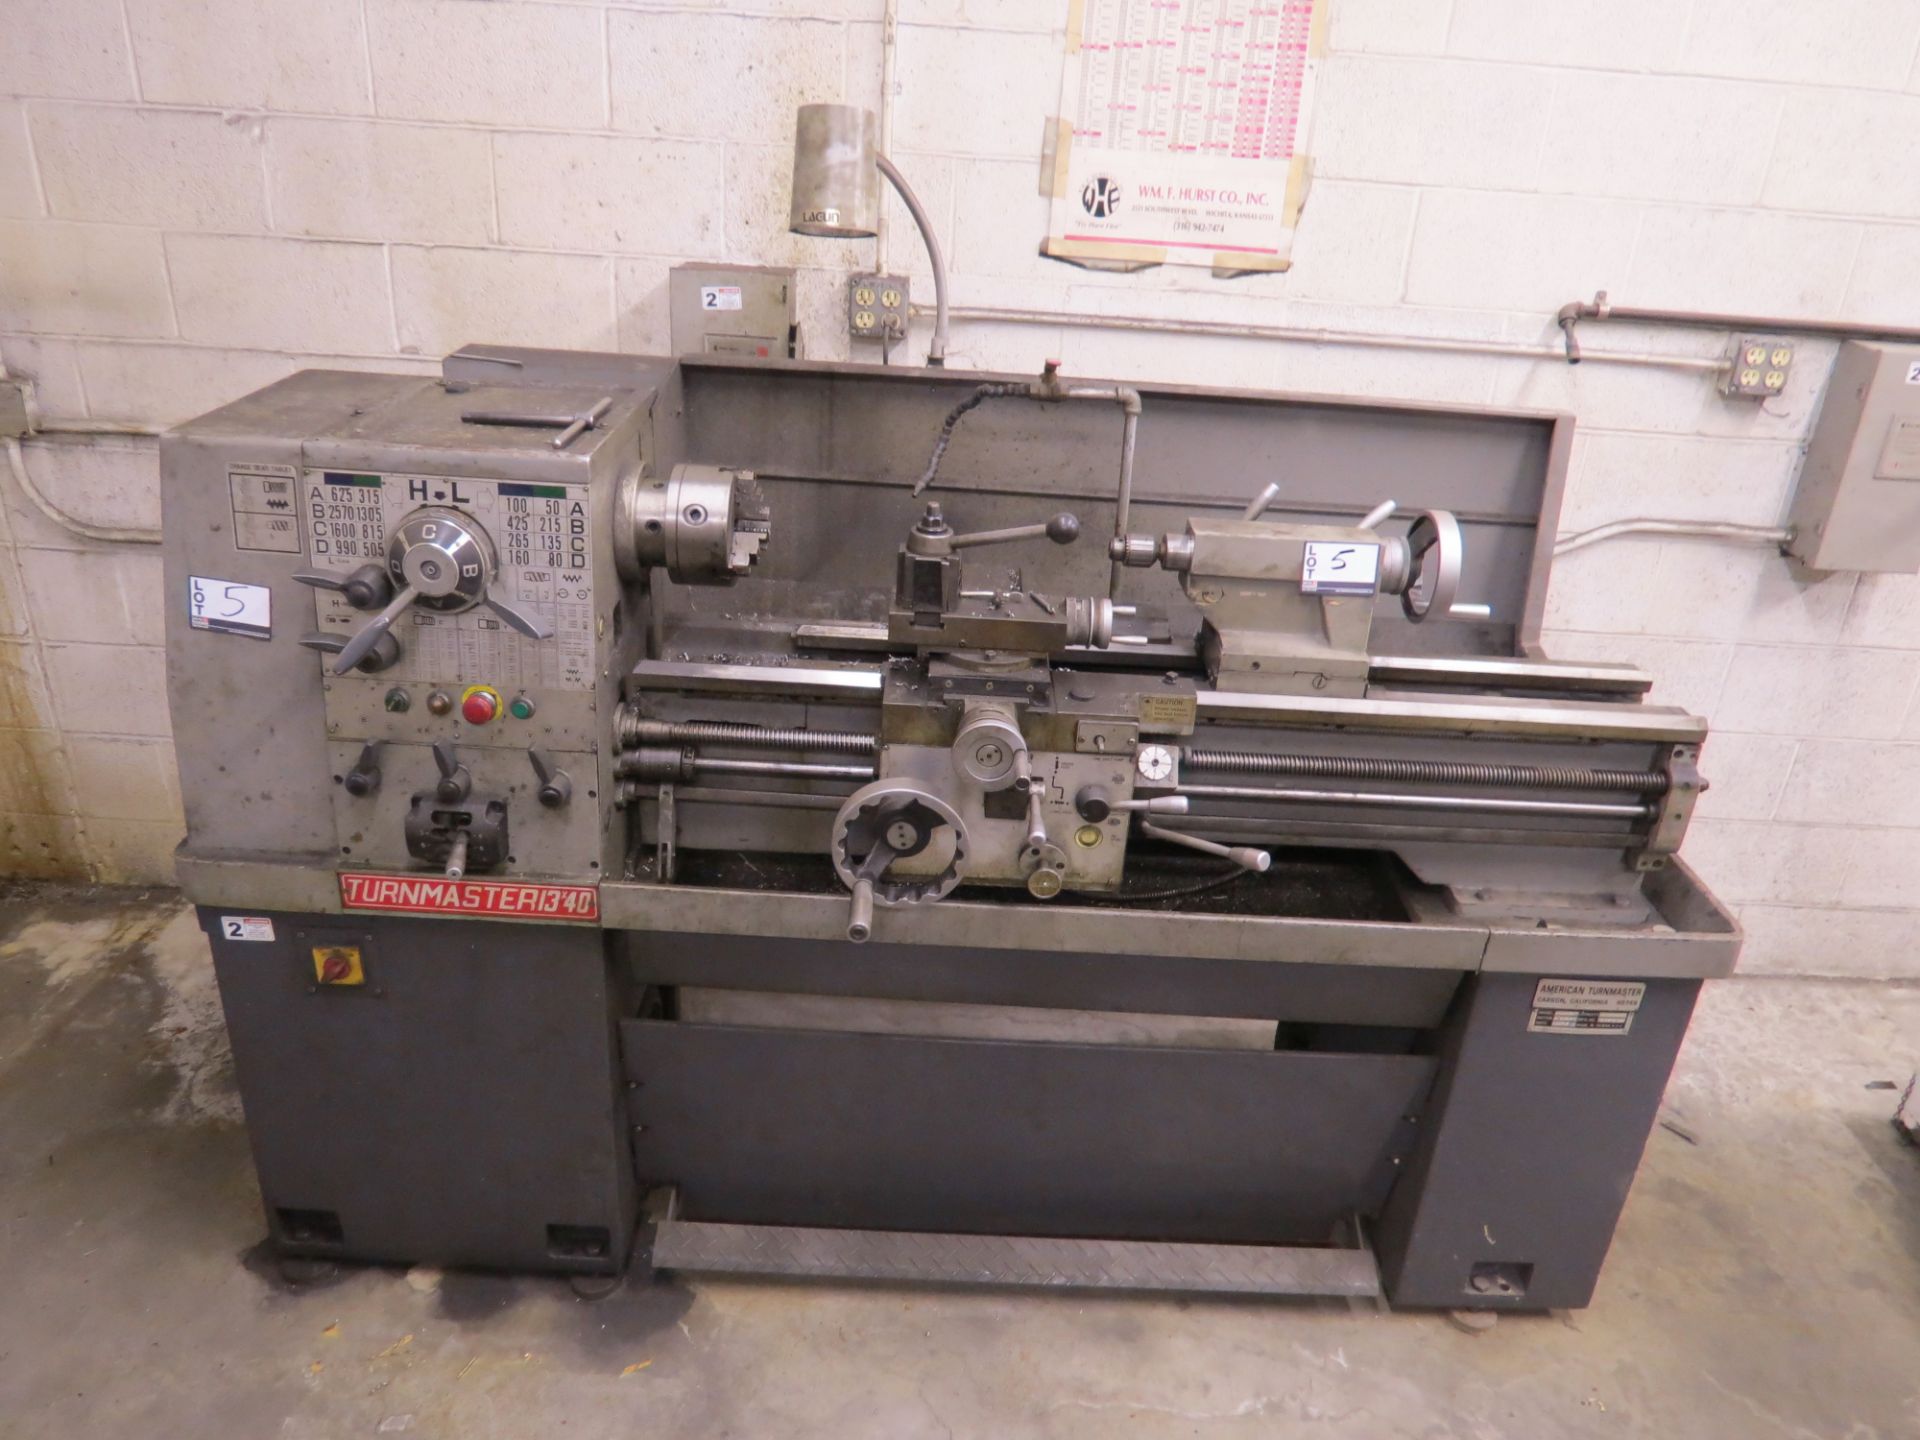 13" x 40" American Turnmaster TRL-1340 Engine Lathe, 3 jaw chuck, tool post, s/n 1349605051269, - Image 5 of 5